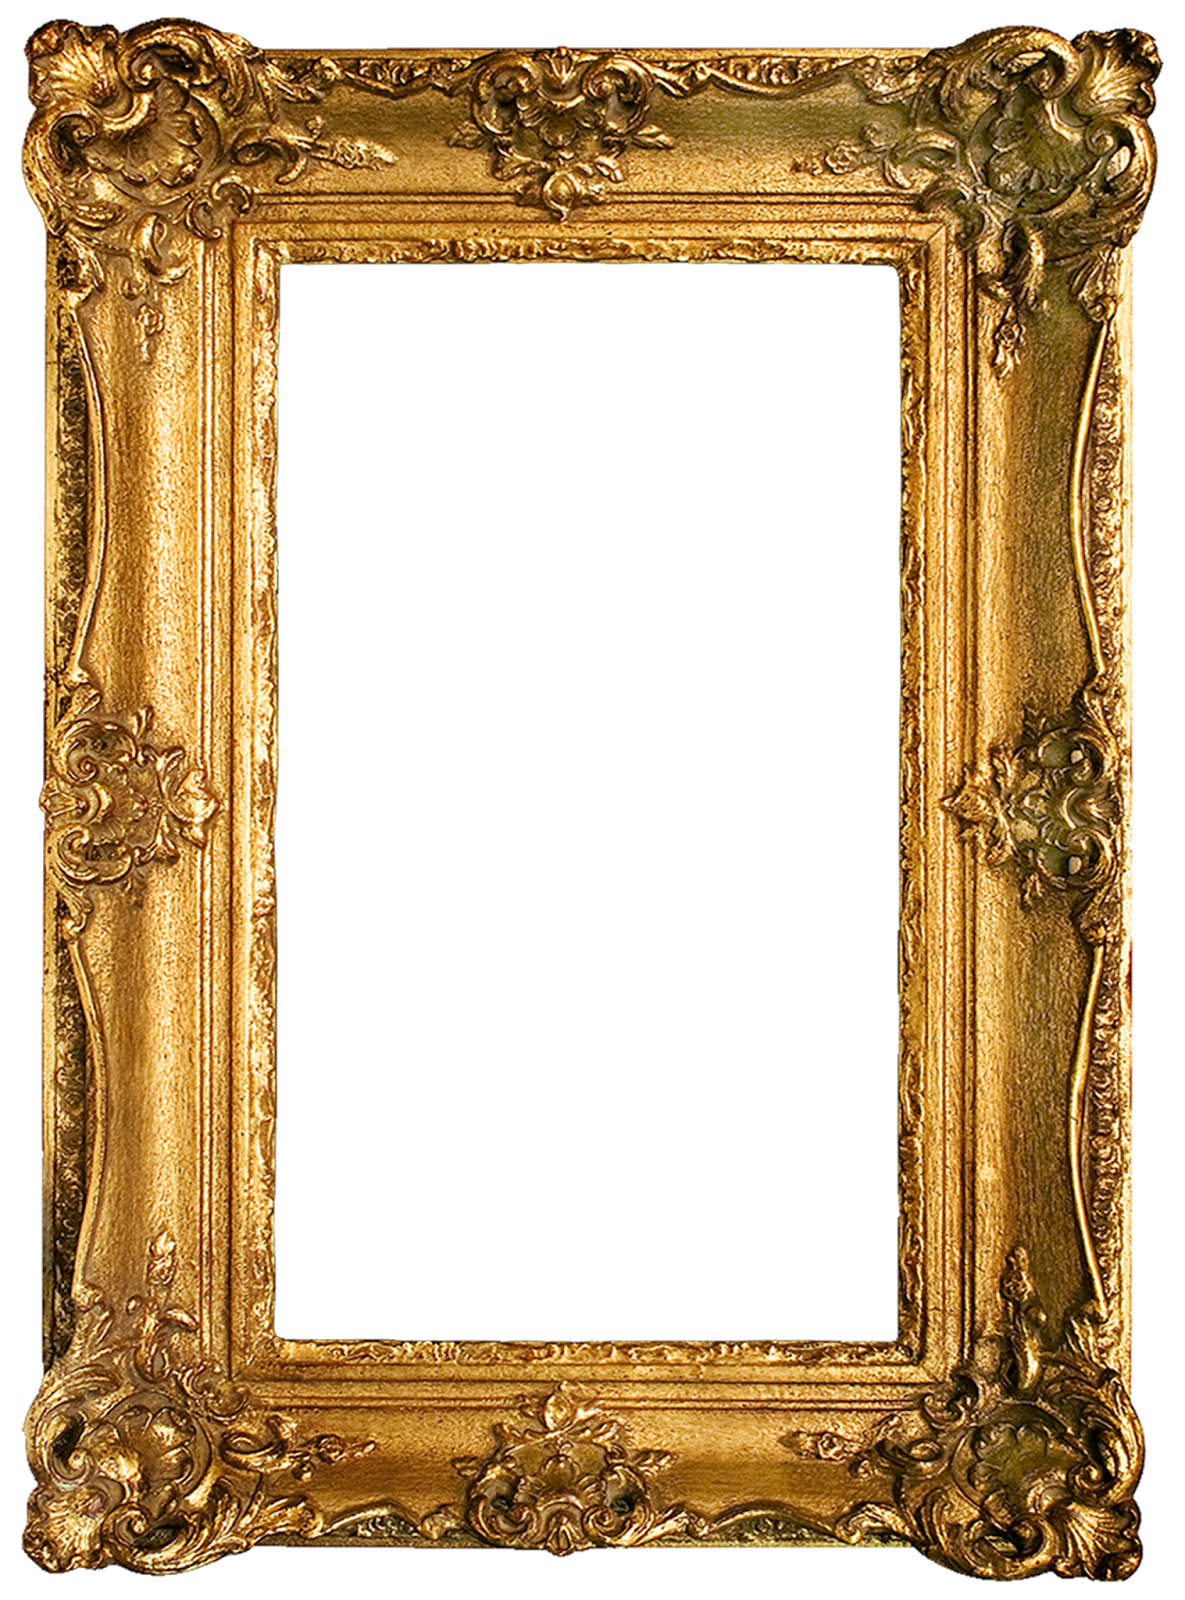 Frame Printable Images Gallery Category Page 5